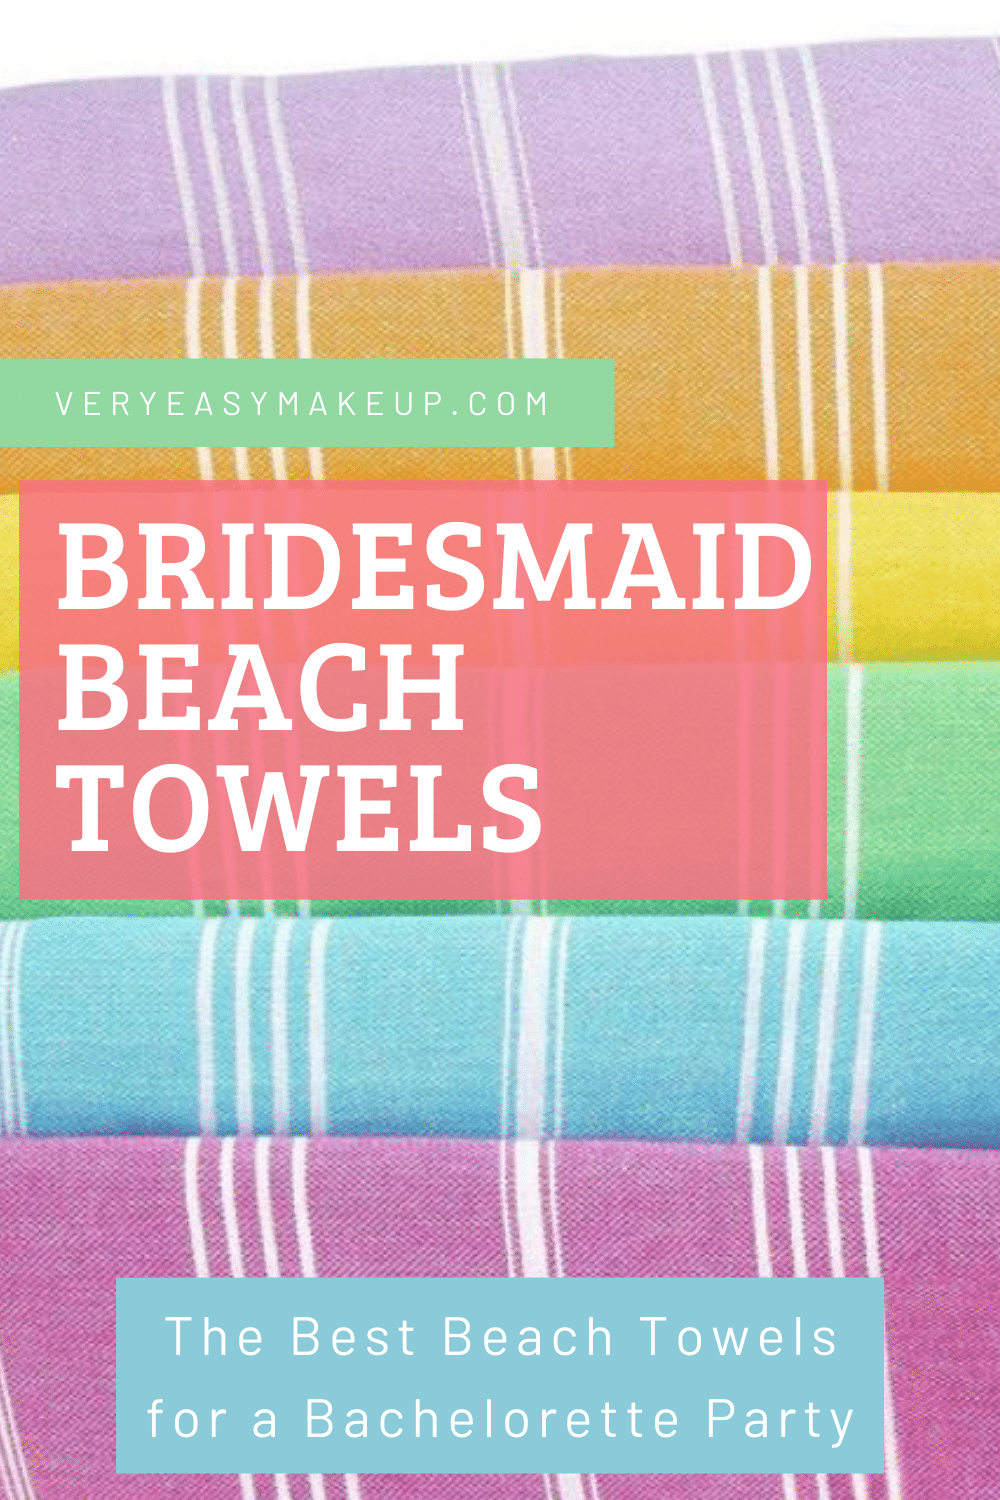 The Best and cheap Bridesmaid Beach Towels by Very Easy Makeup